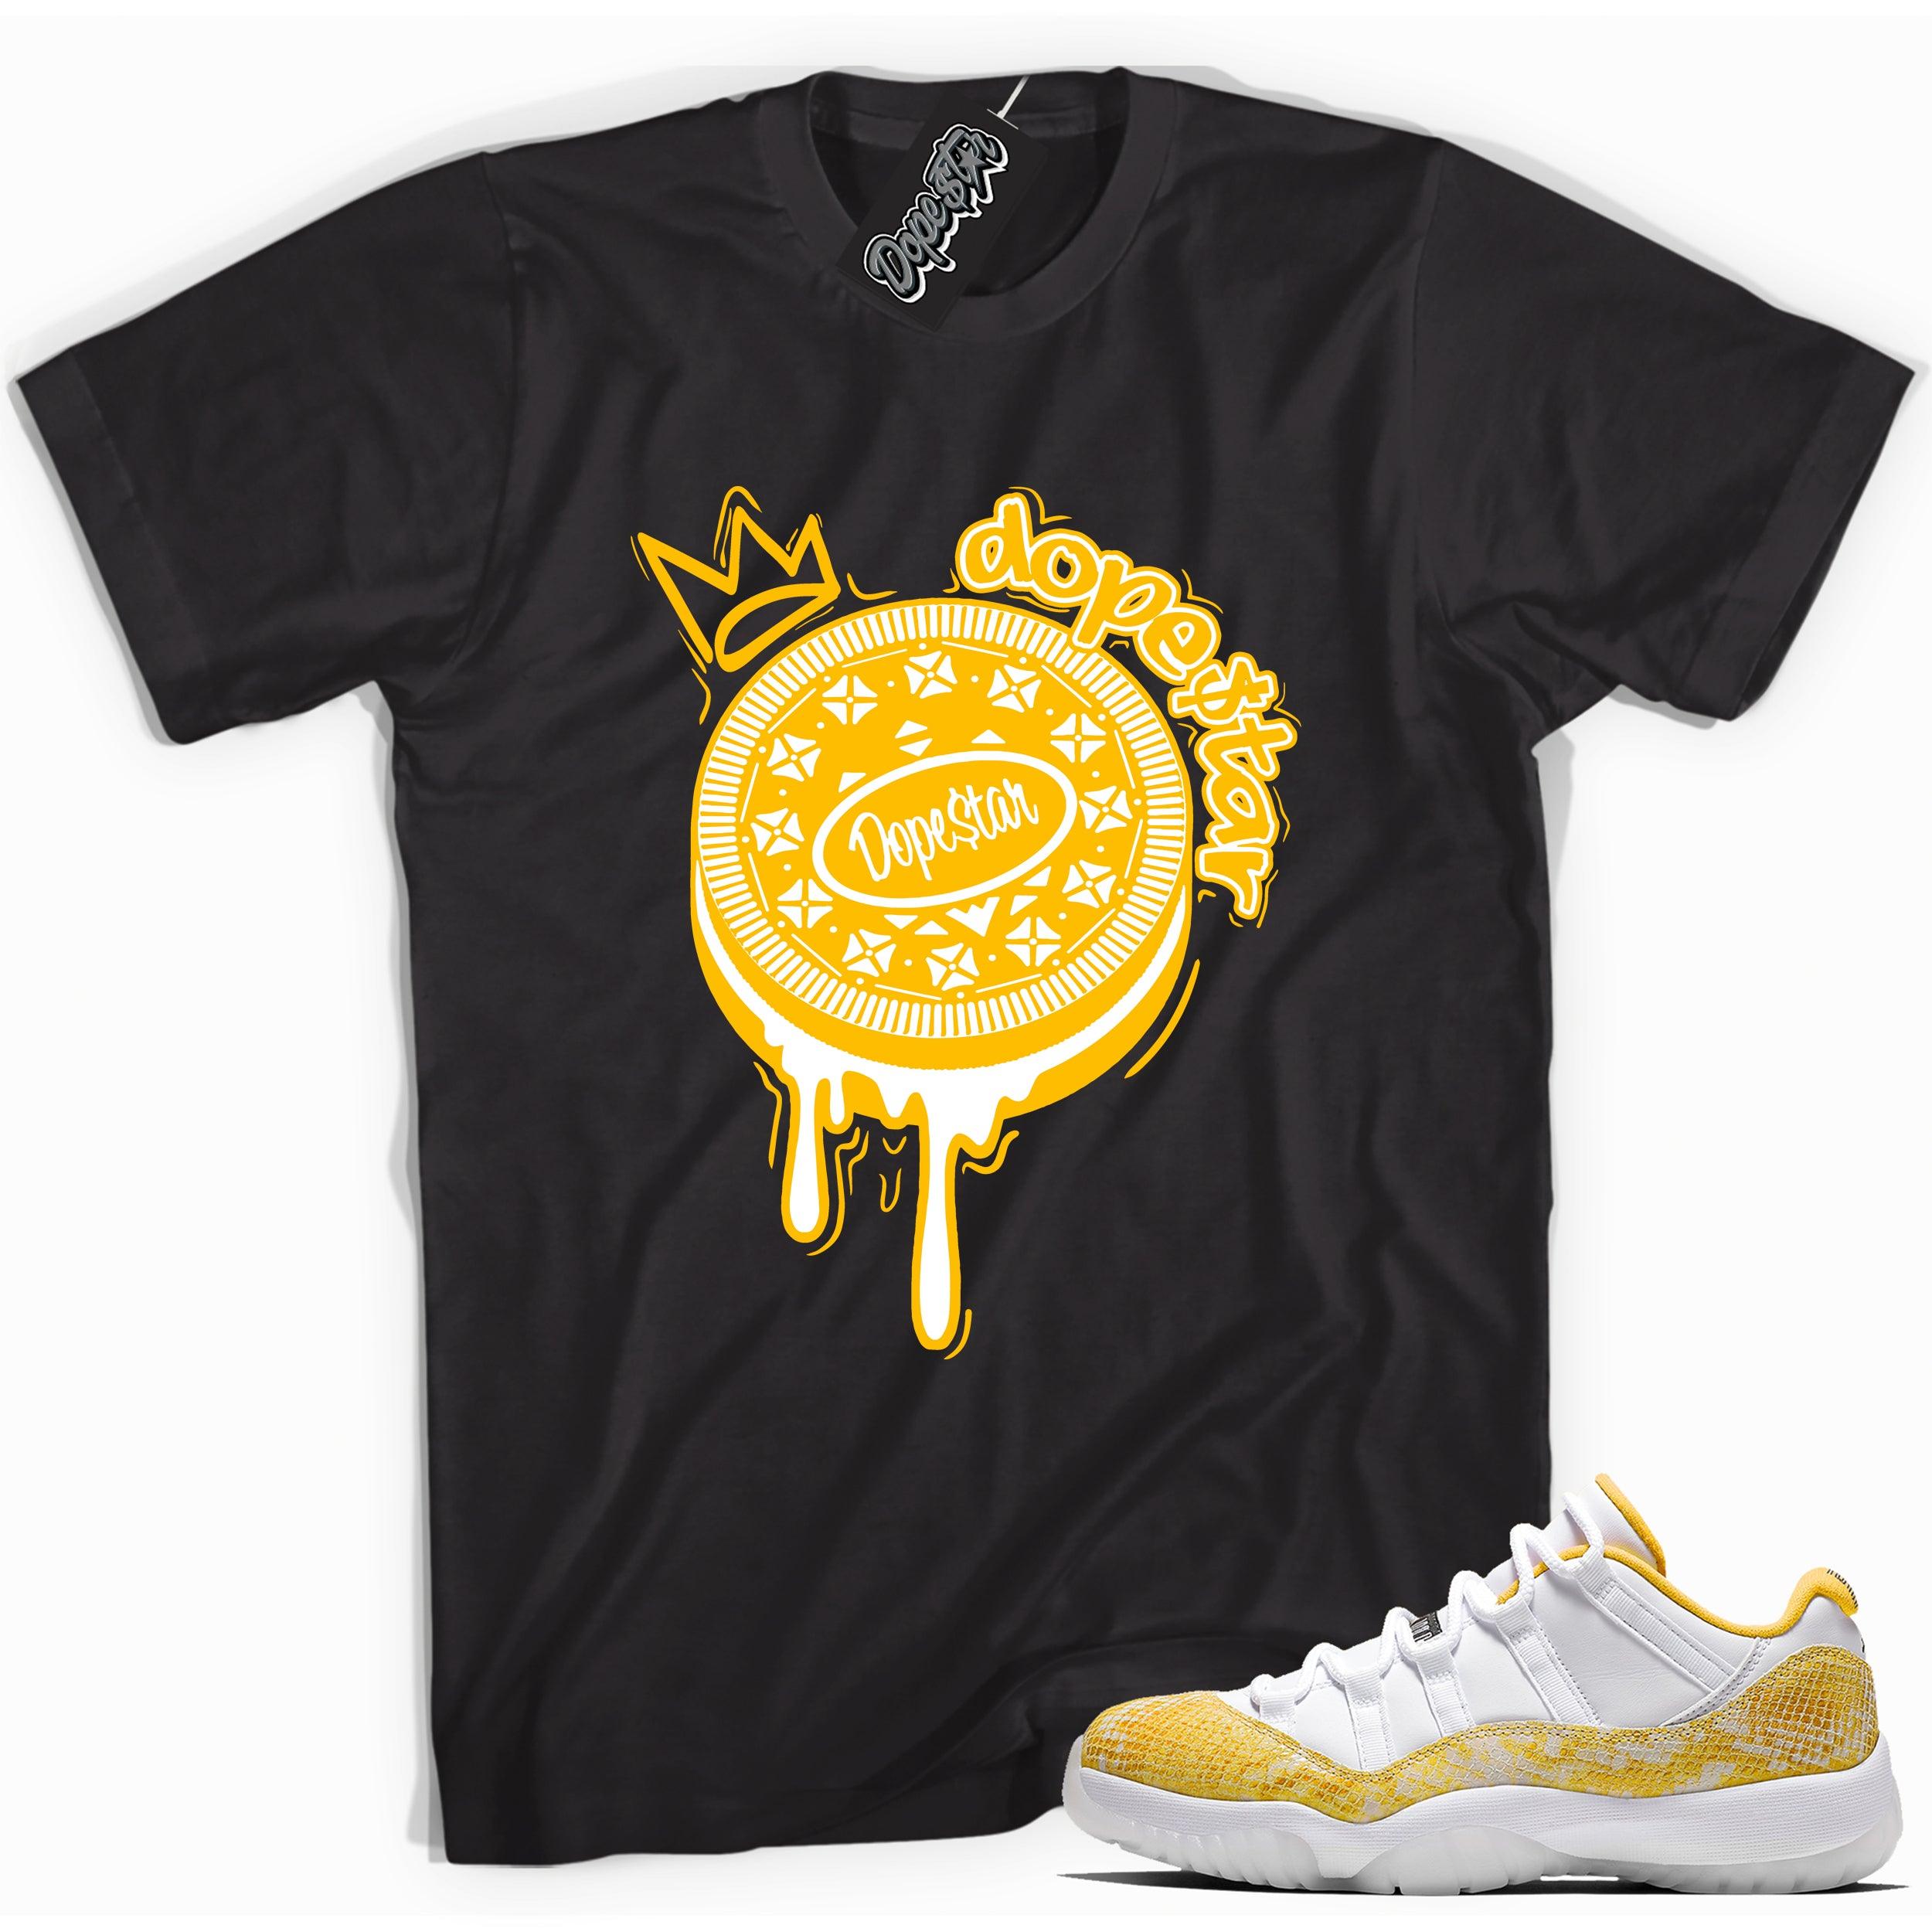 Cool black graphic tee with 'oreo dopestar' print, that perfectly matches  Air Jordan 11 Retro Low Yellow Snakeskin sneakers